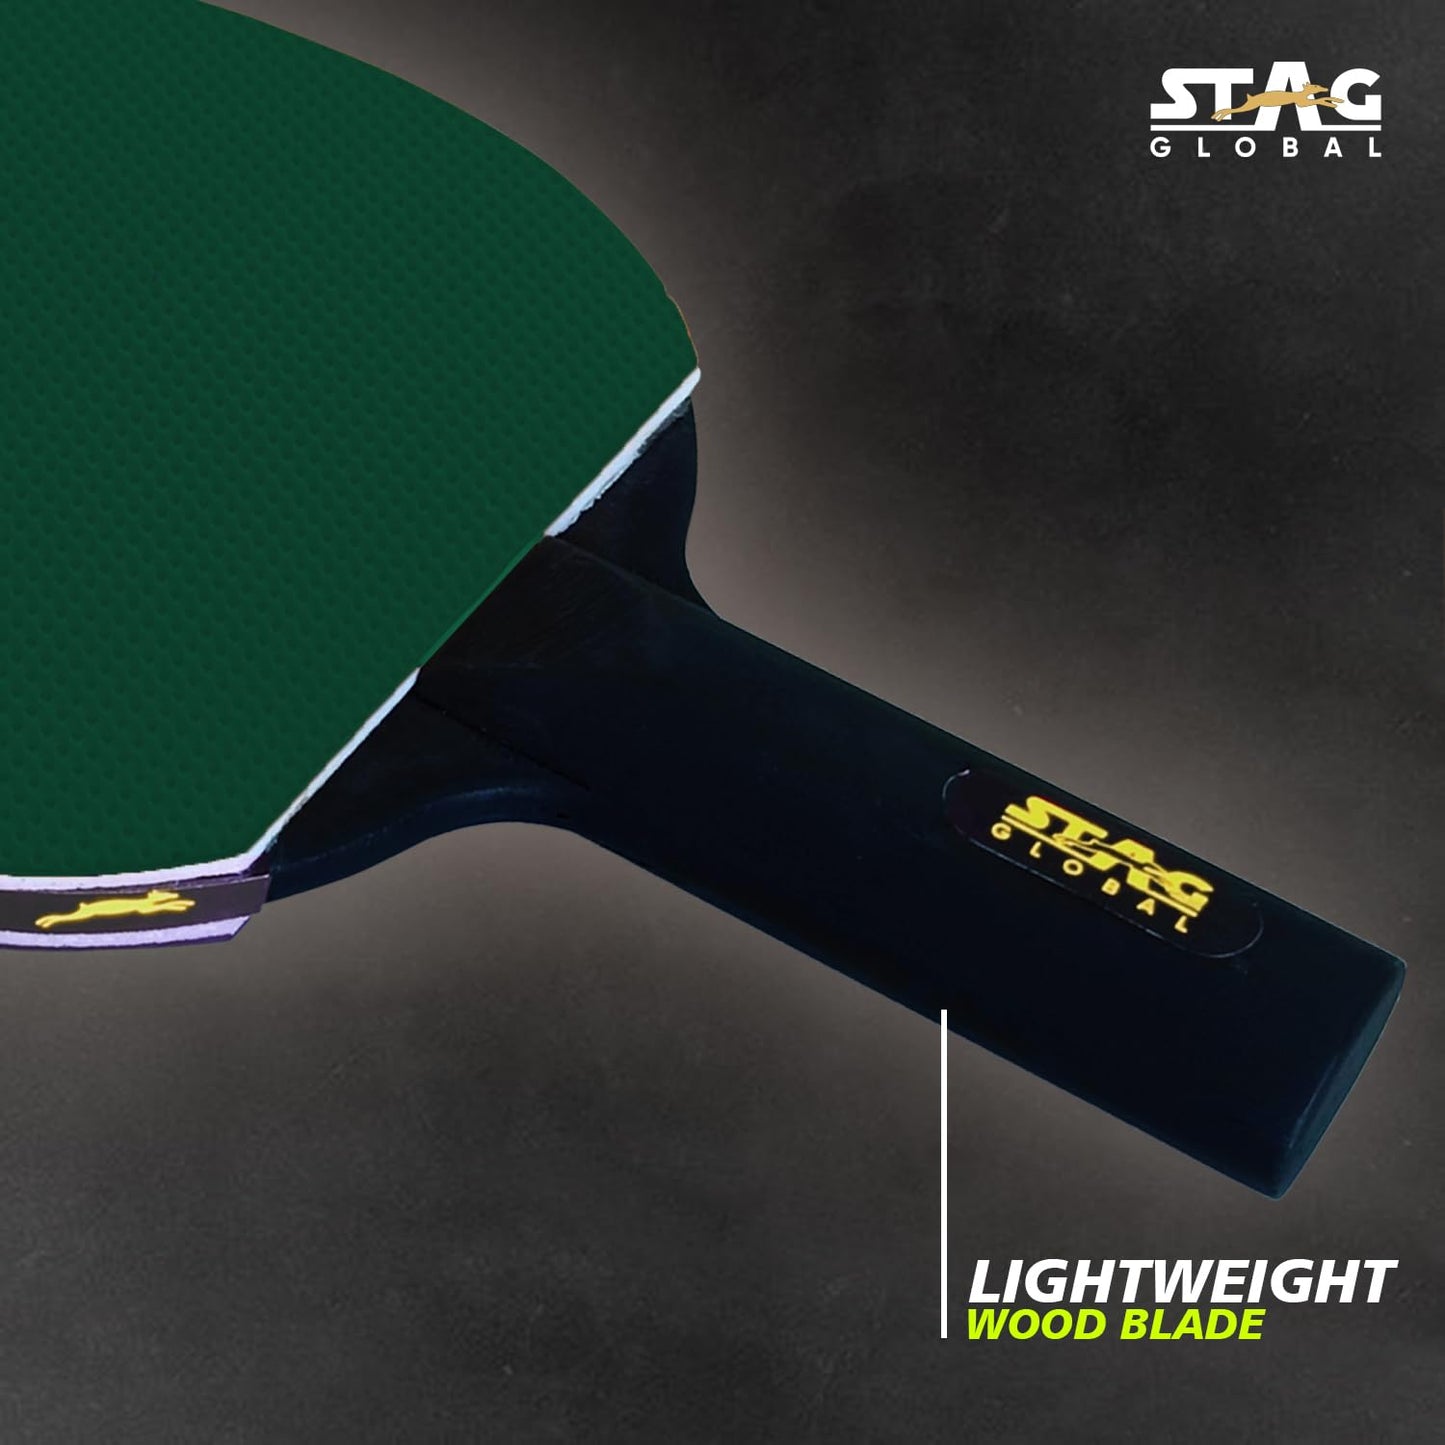 (New Launch) STAG Global Series 2 Table Tennis Racket | Lightweight |FUNPLAY & Beginners | Multi-Color |Grip Color Green & Black |